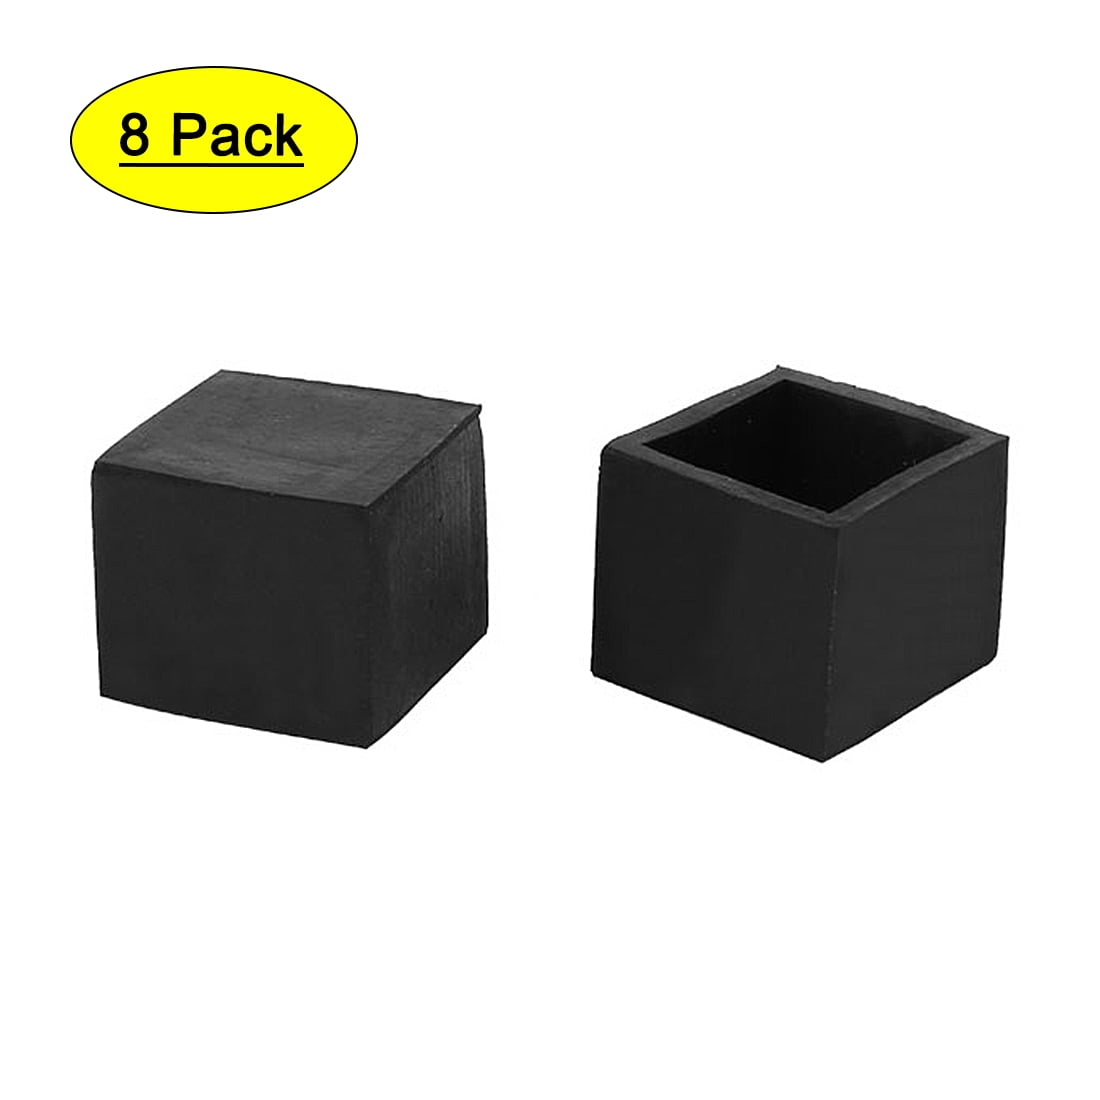 10pcs Square Chair Leg Caps Silicone Floor Protector Coffee Table Feet Cover 